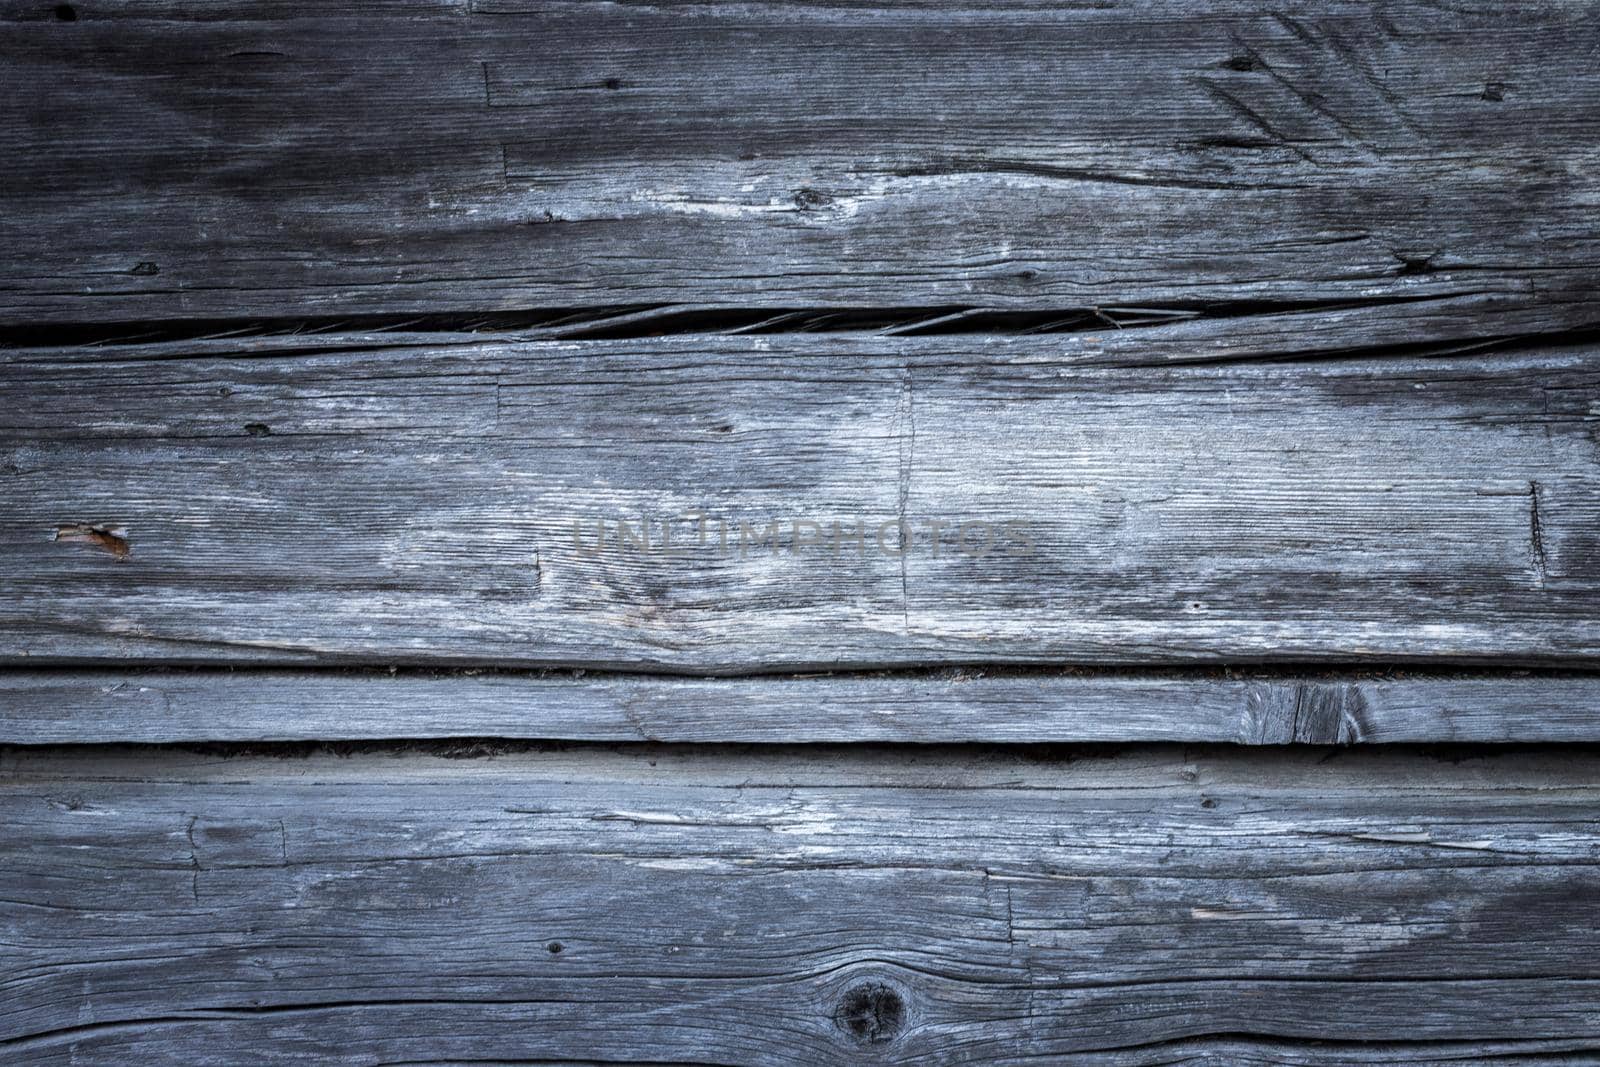 Closeup picture of old rustic wooden planks